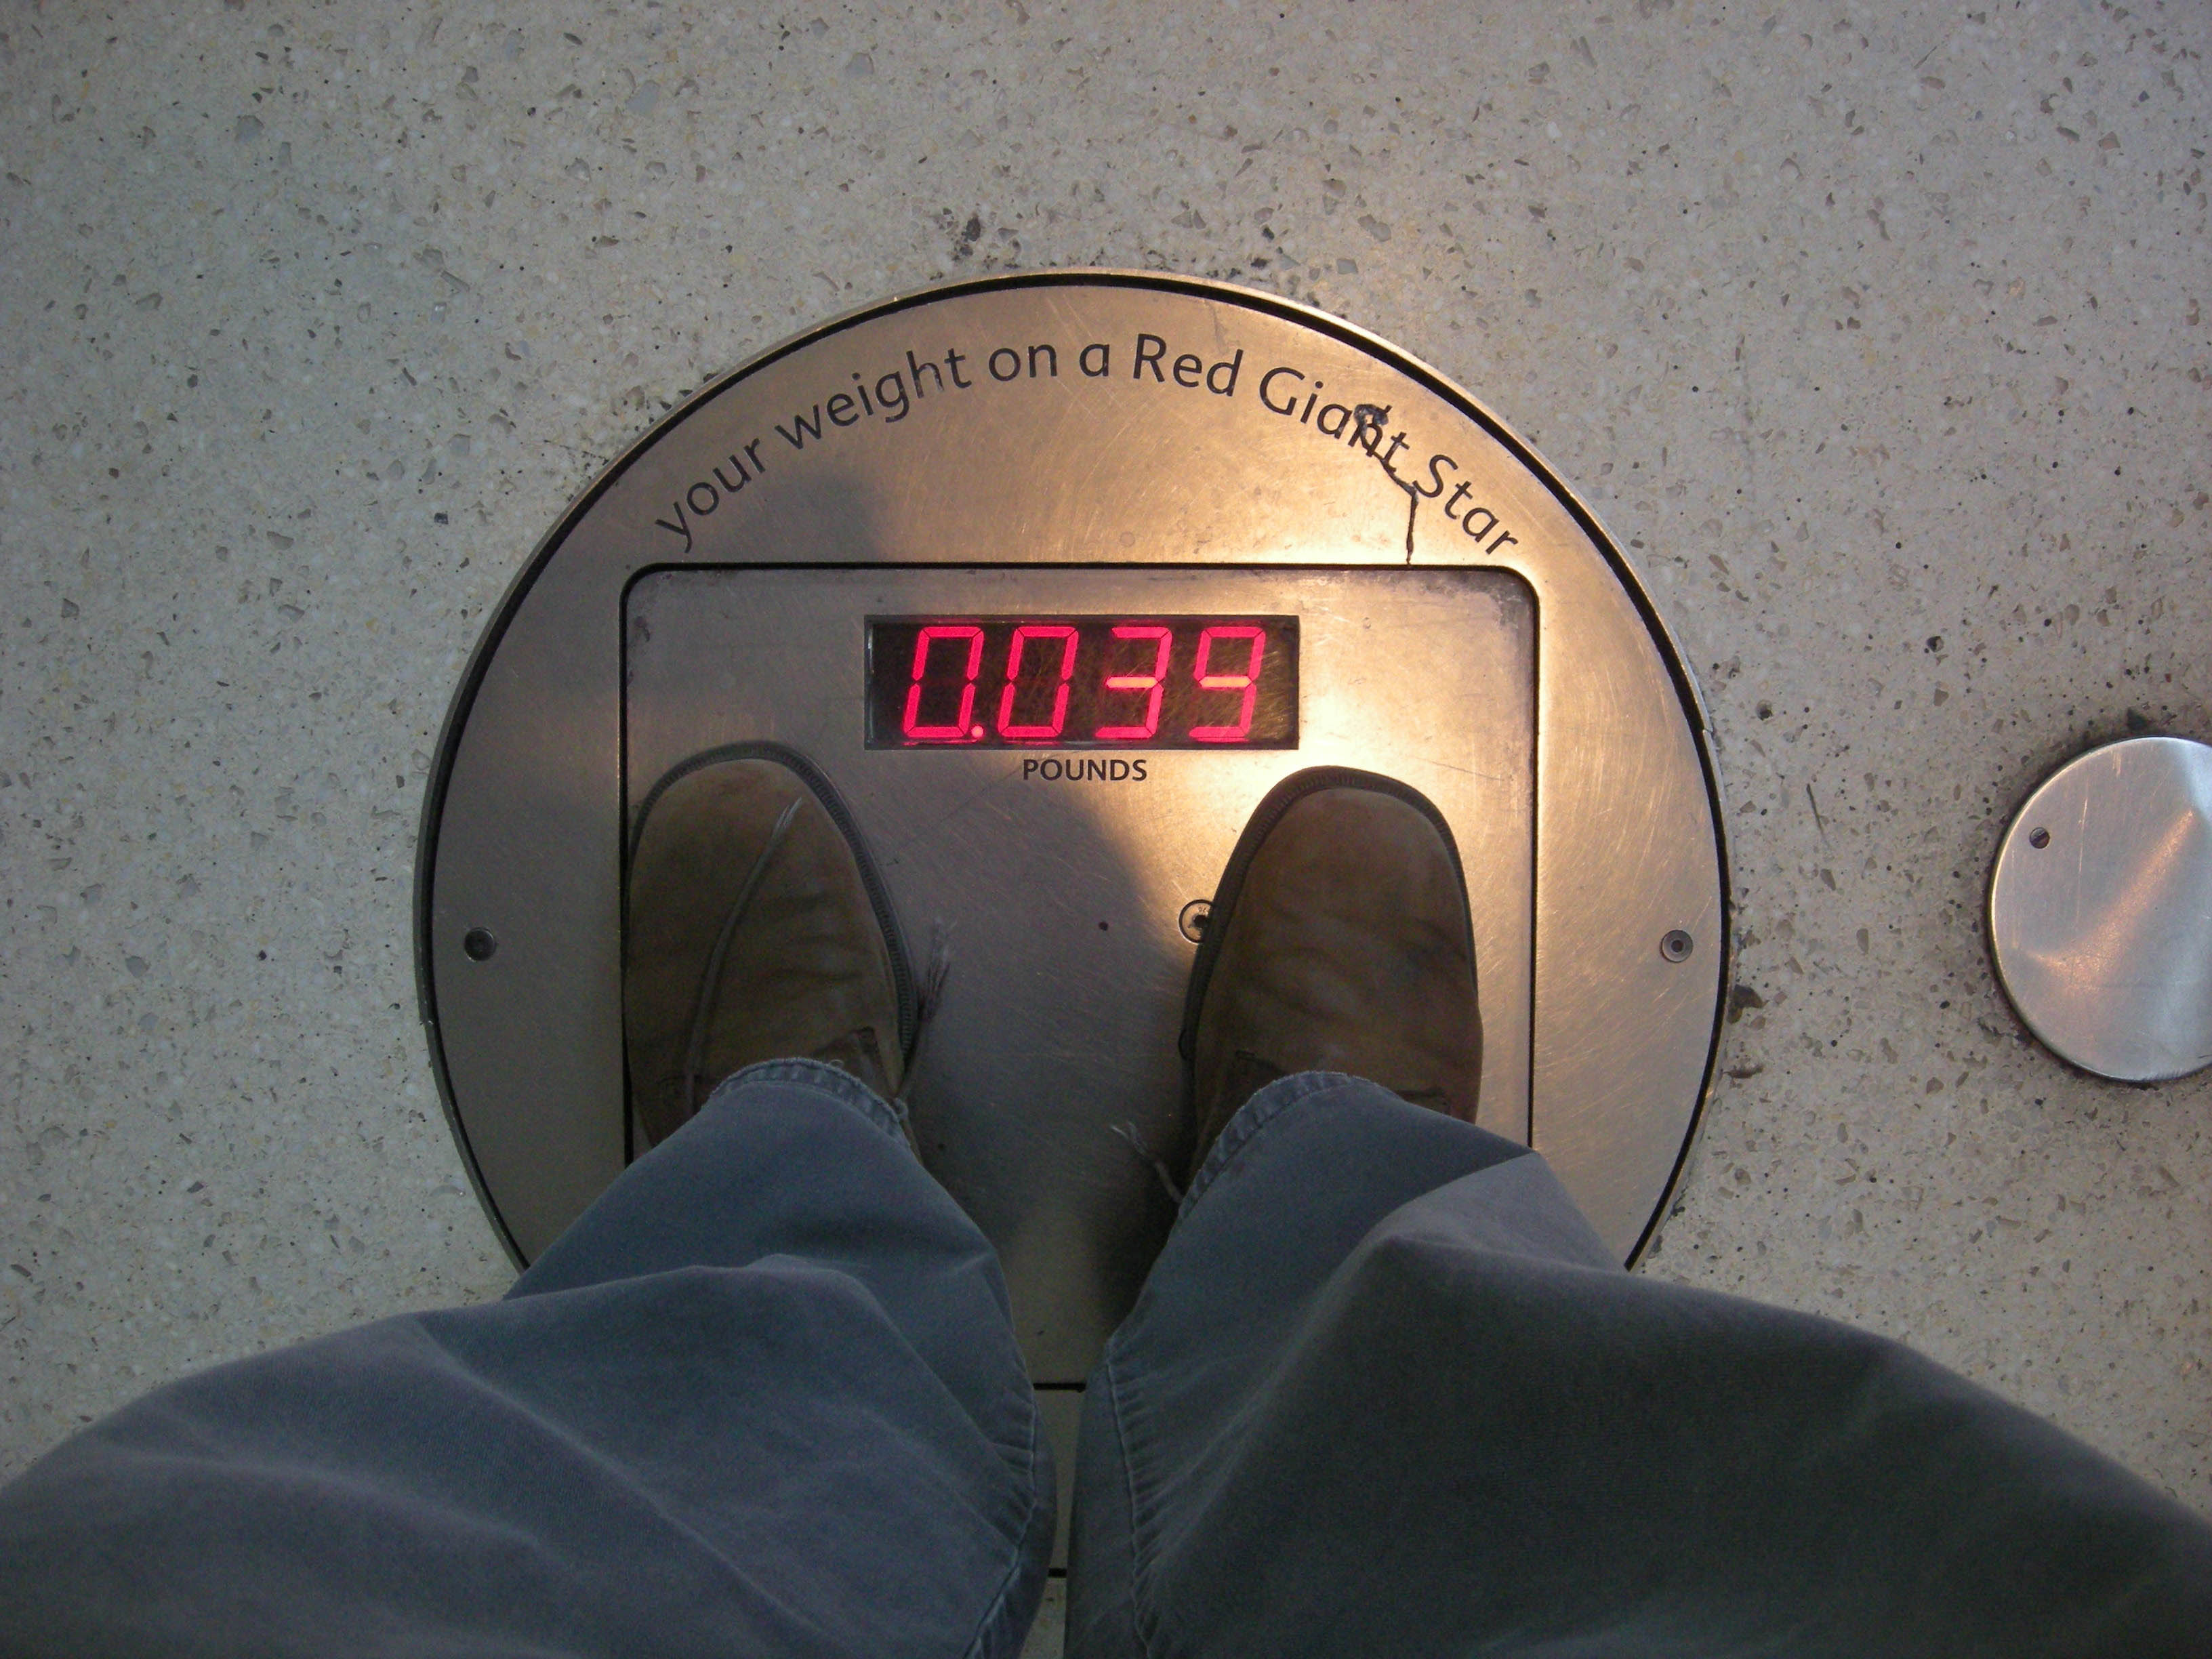 My weight if on a giant red star (AMNH, New York) (2012)